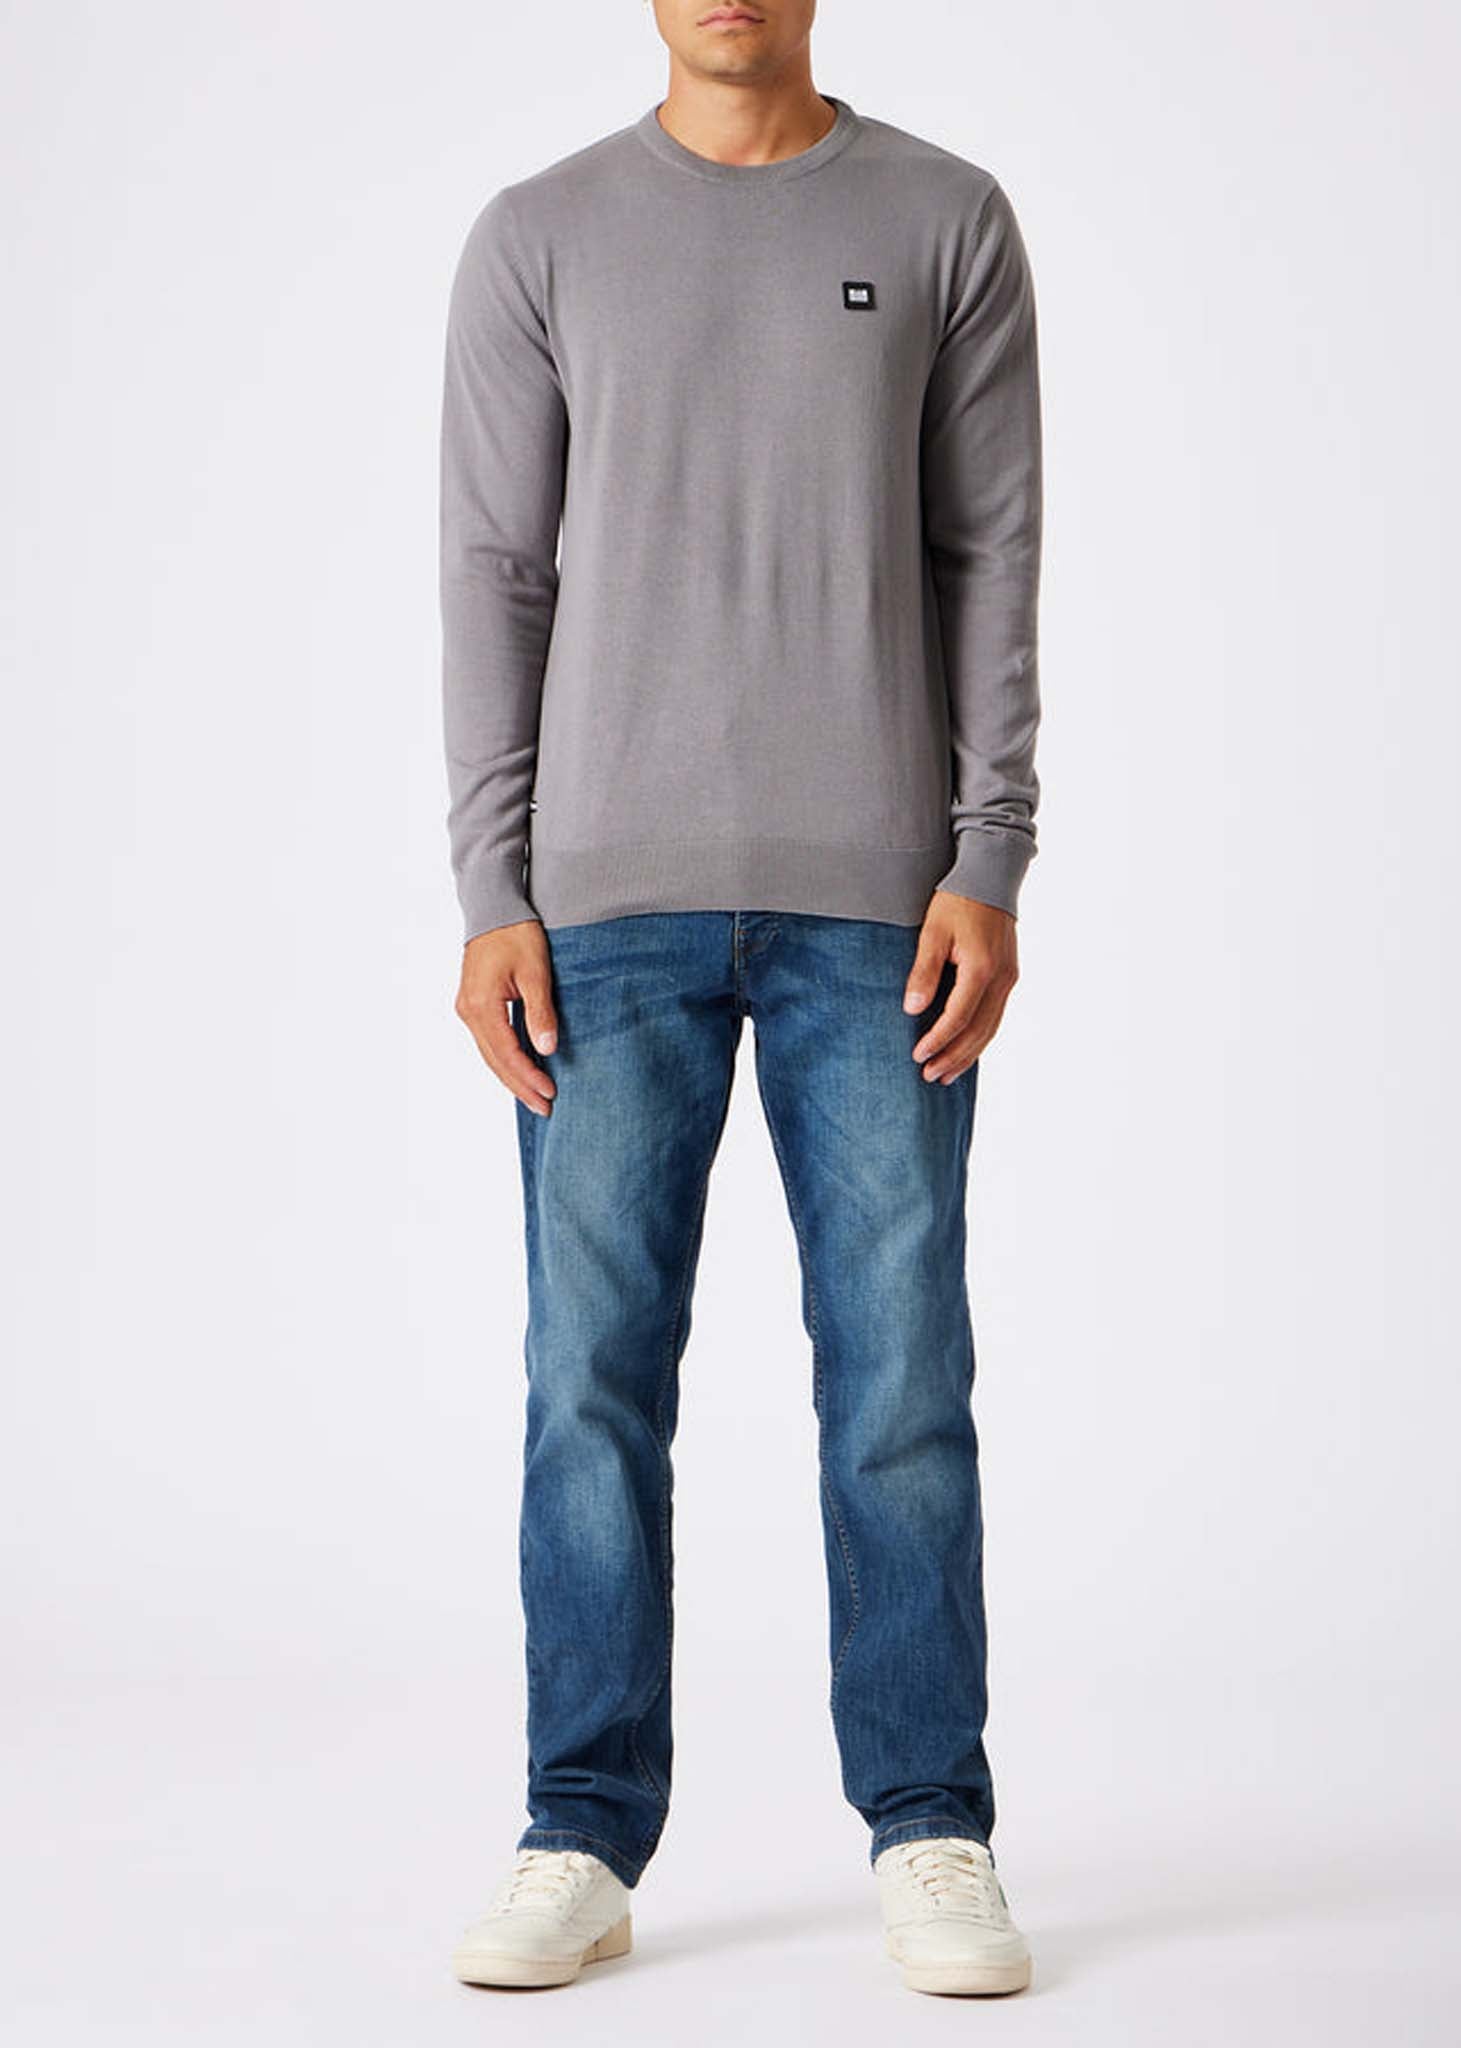 Weekend Offender sweater drizzle grey